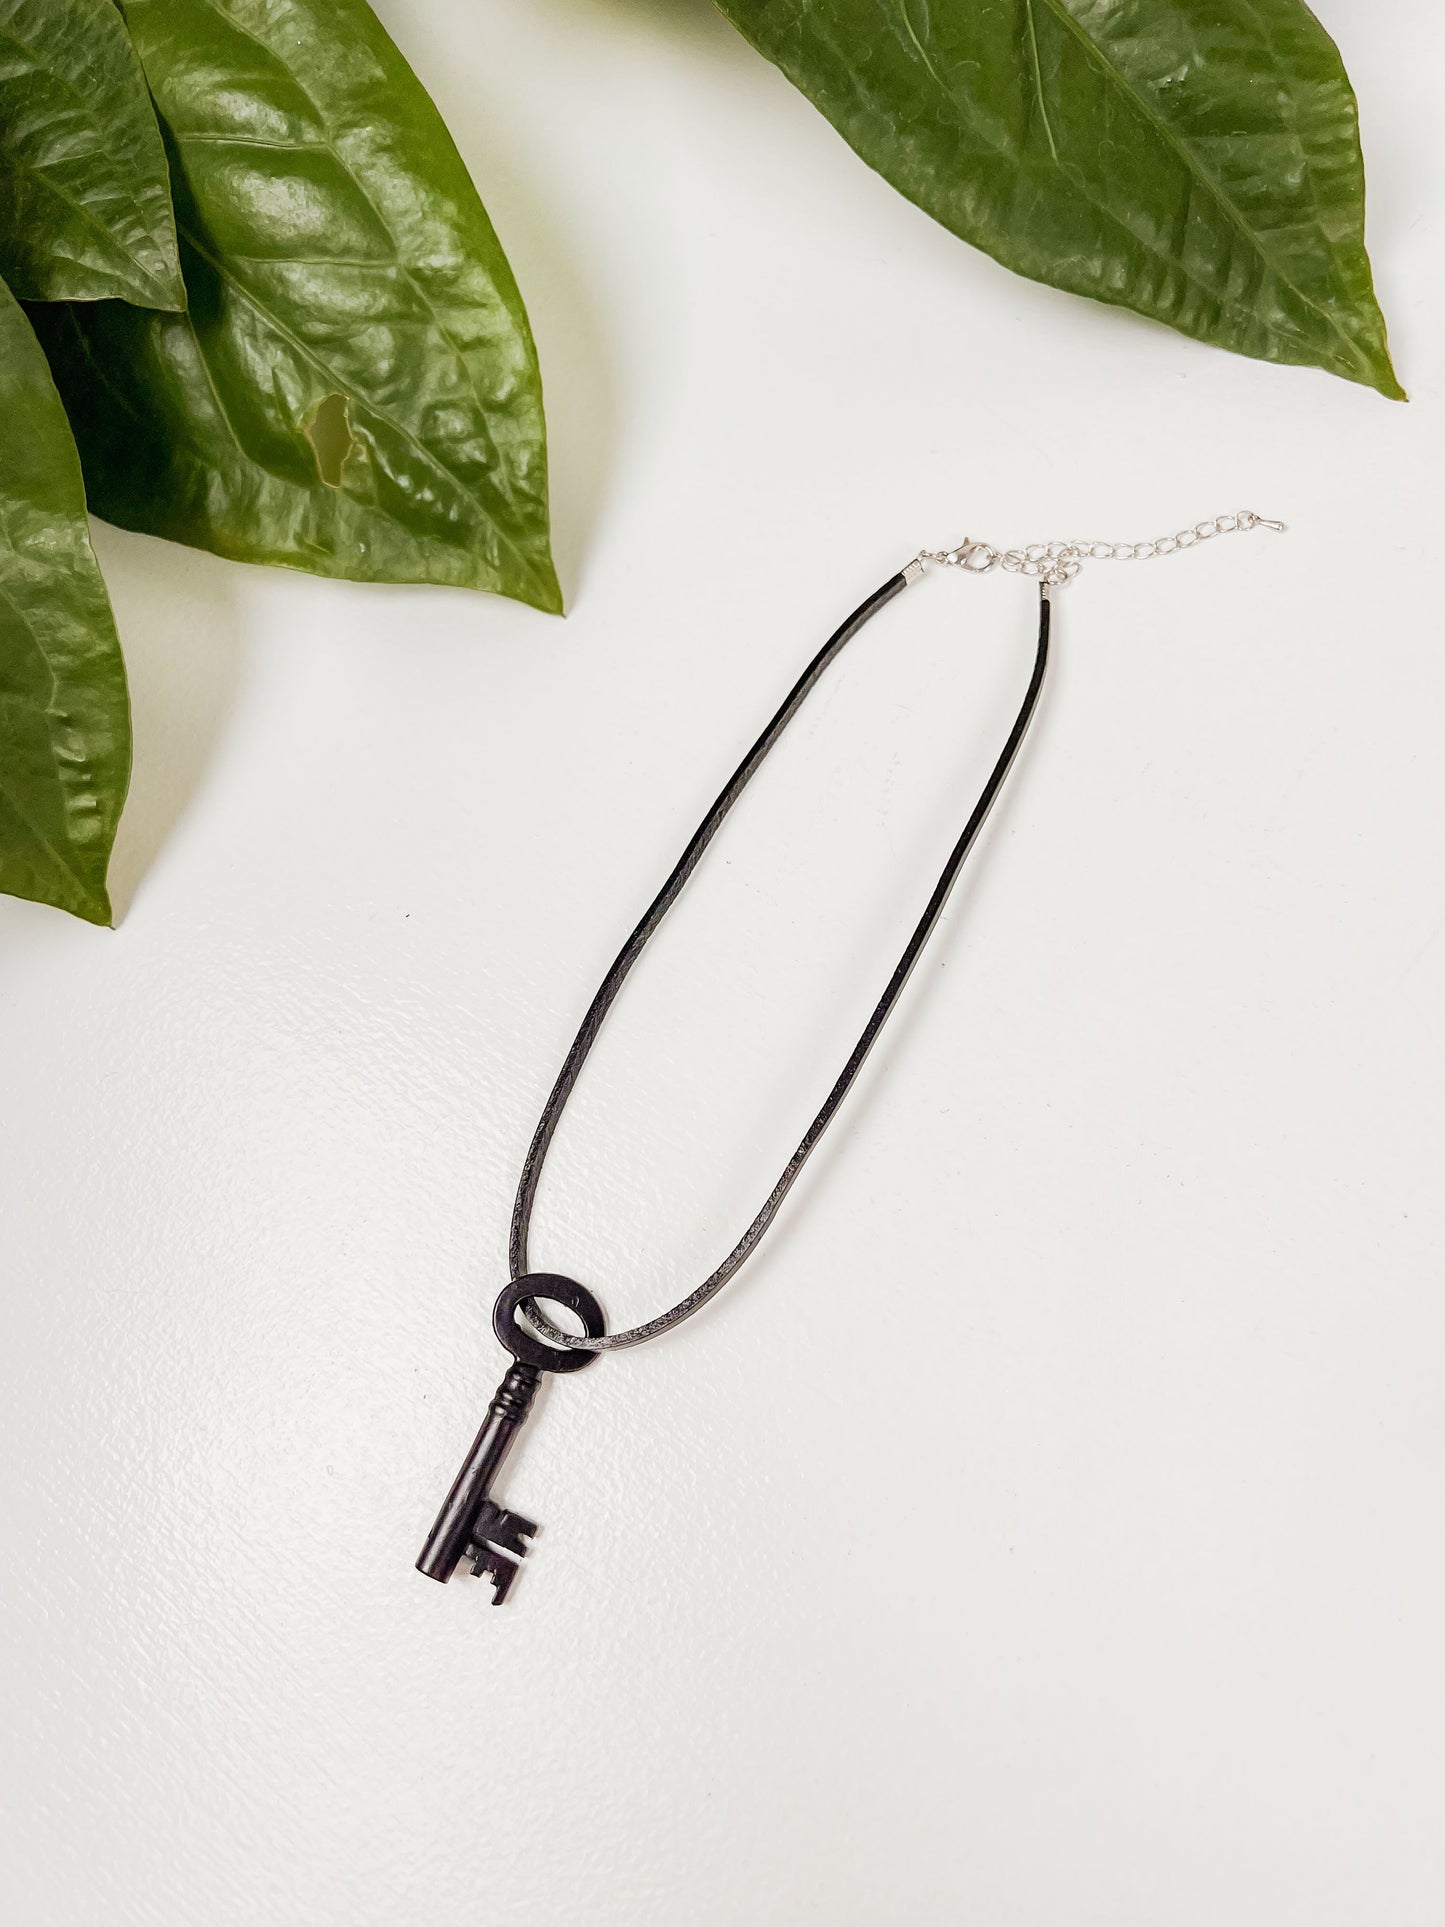 Antique Intricate Skeleton Key with Black Suede Choker